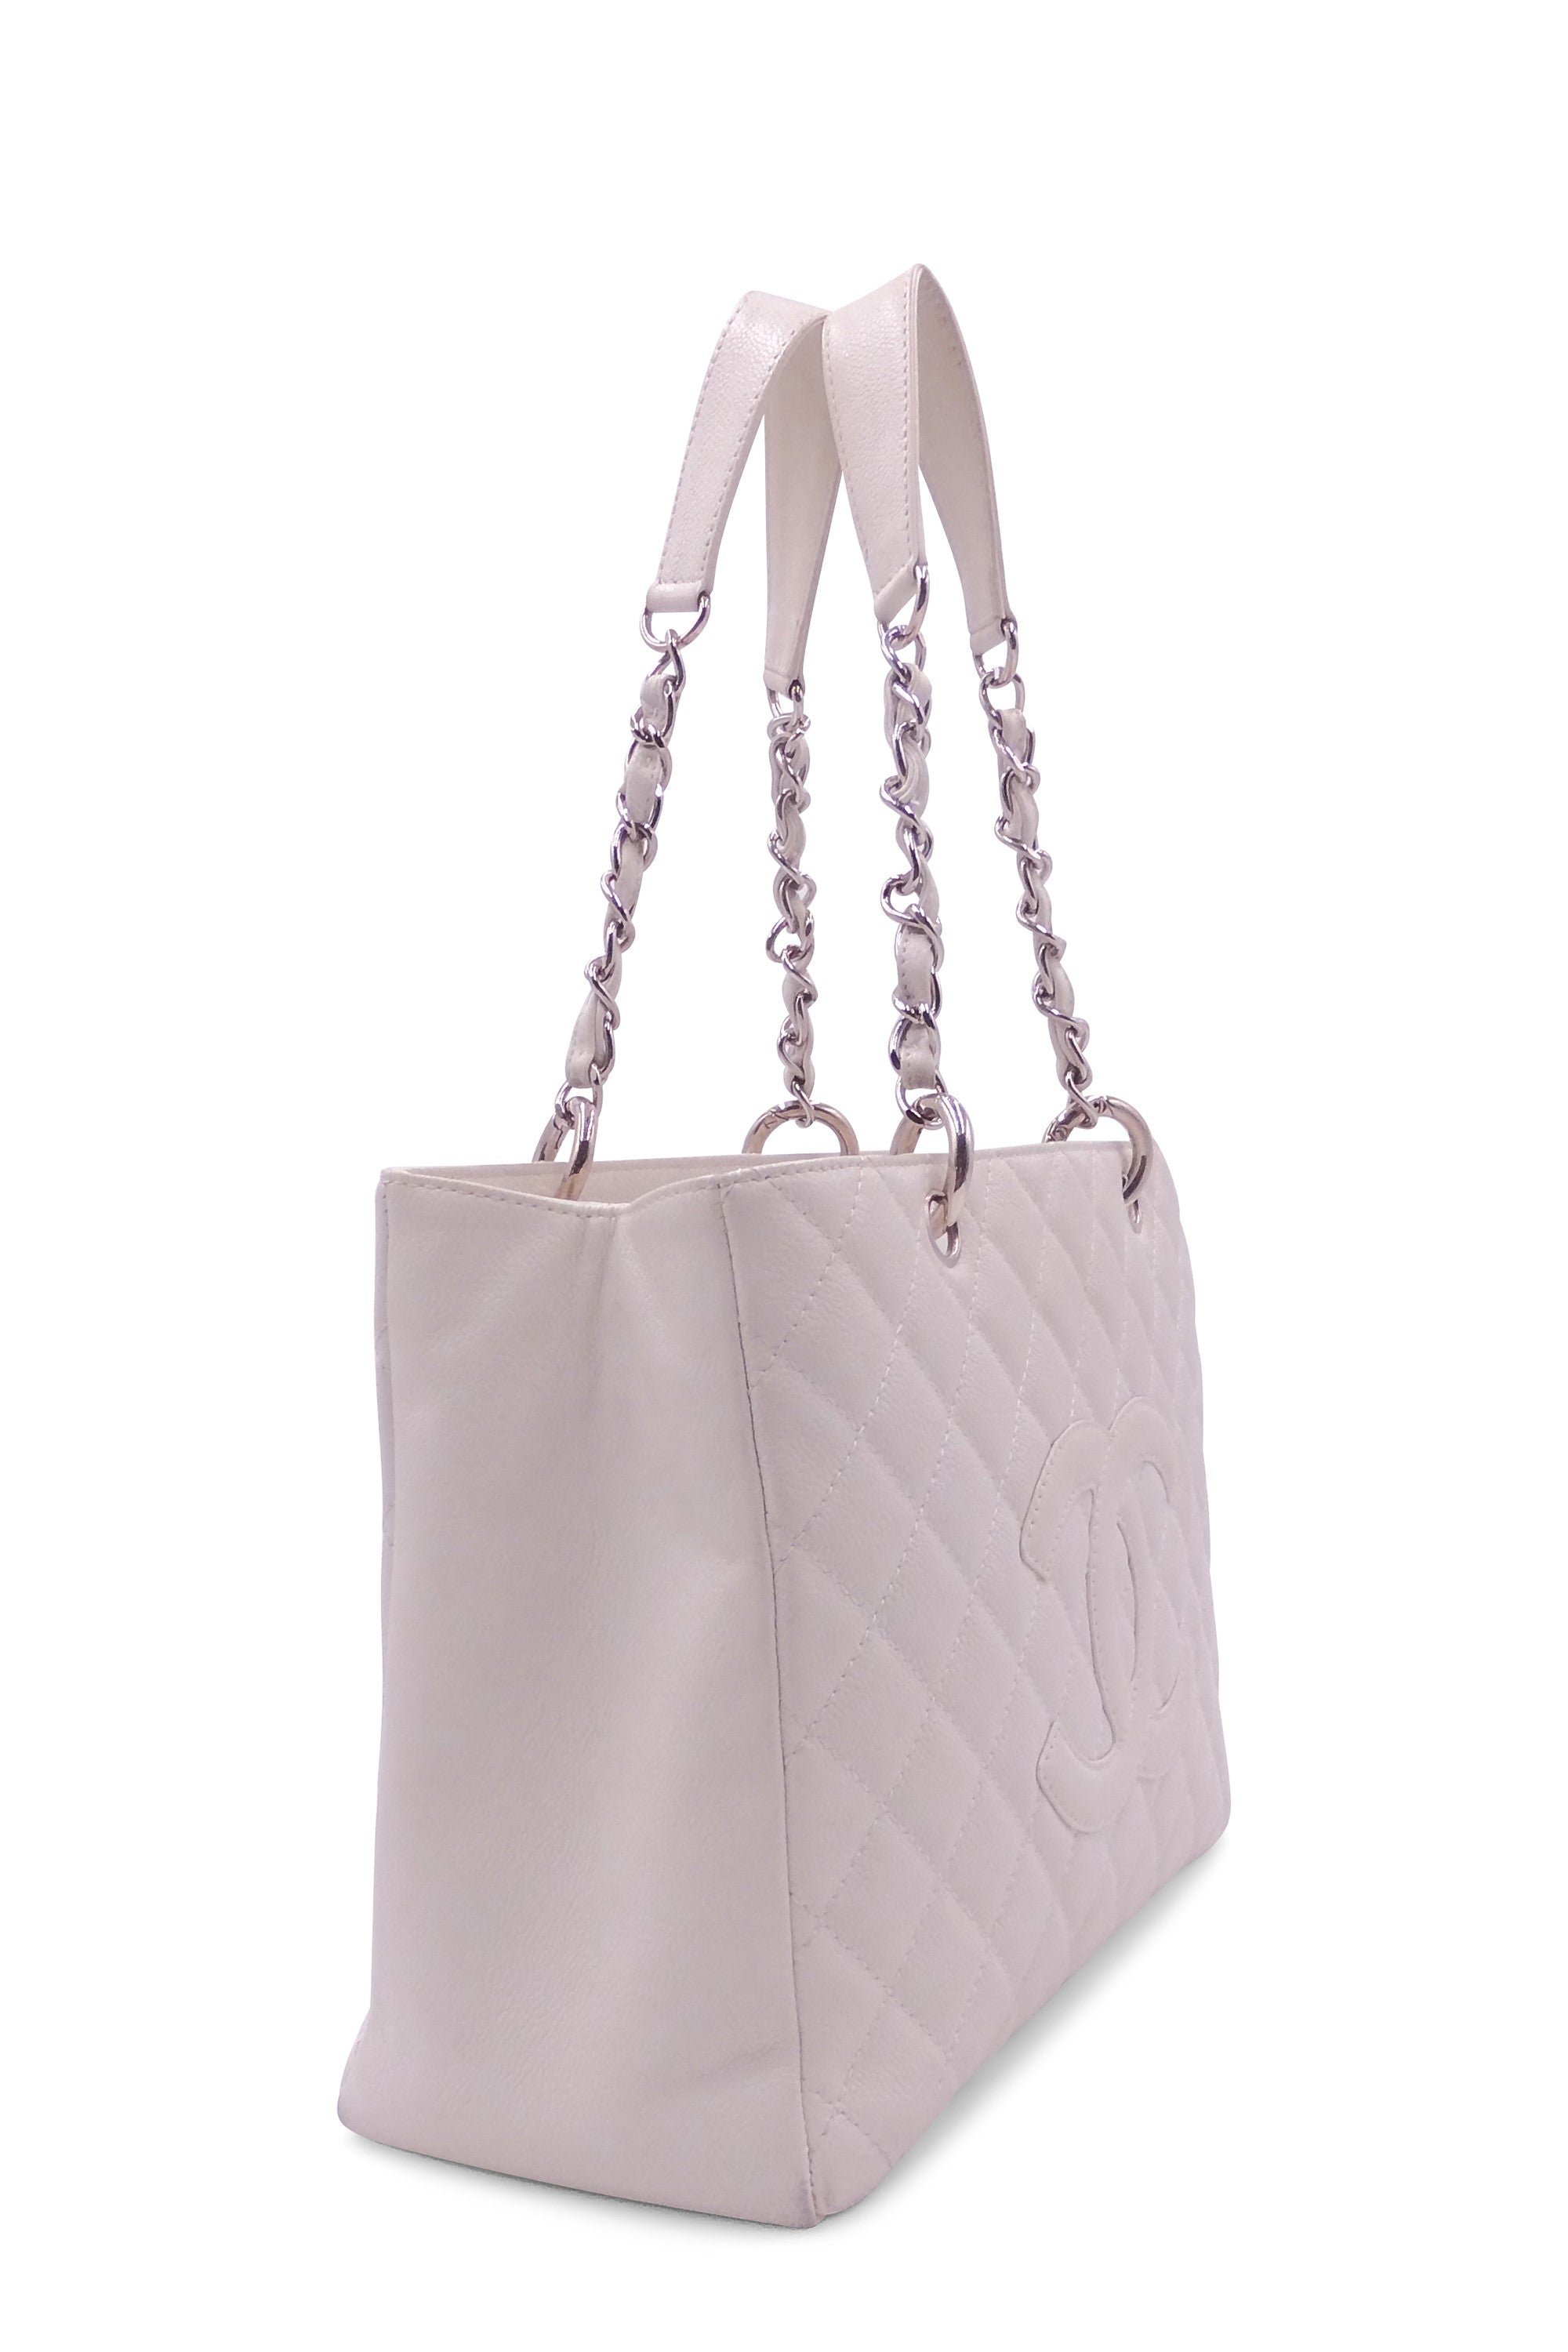 Buy Authentic, Preloved Chanel Grand Shopping Tote White with